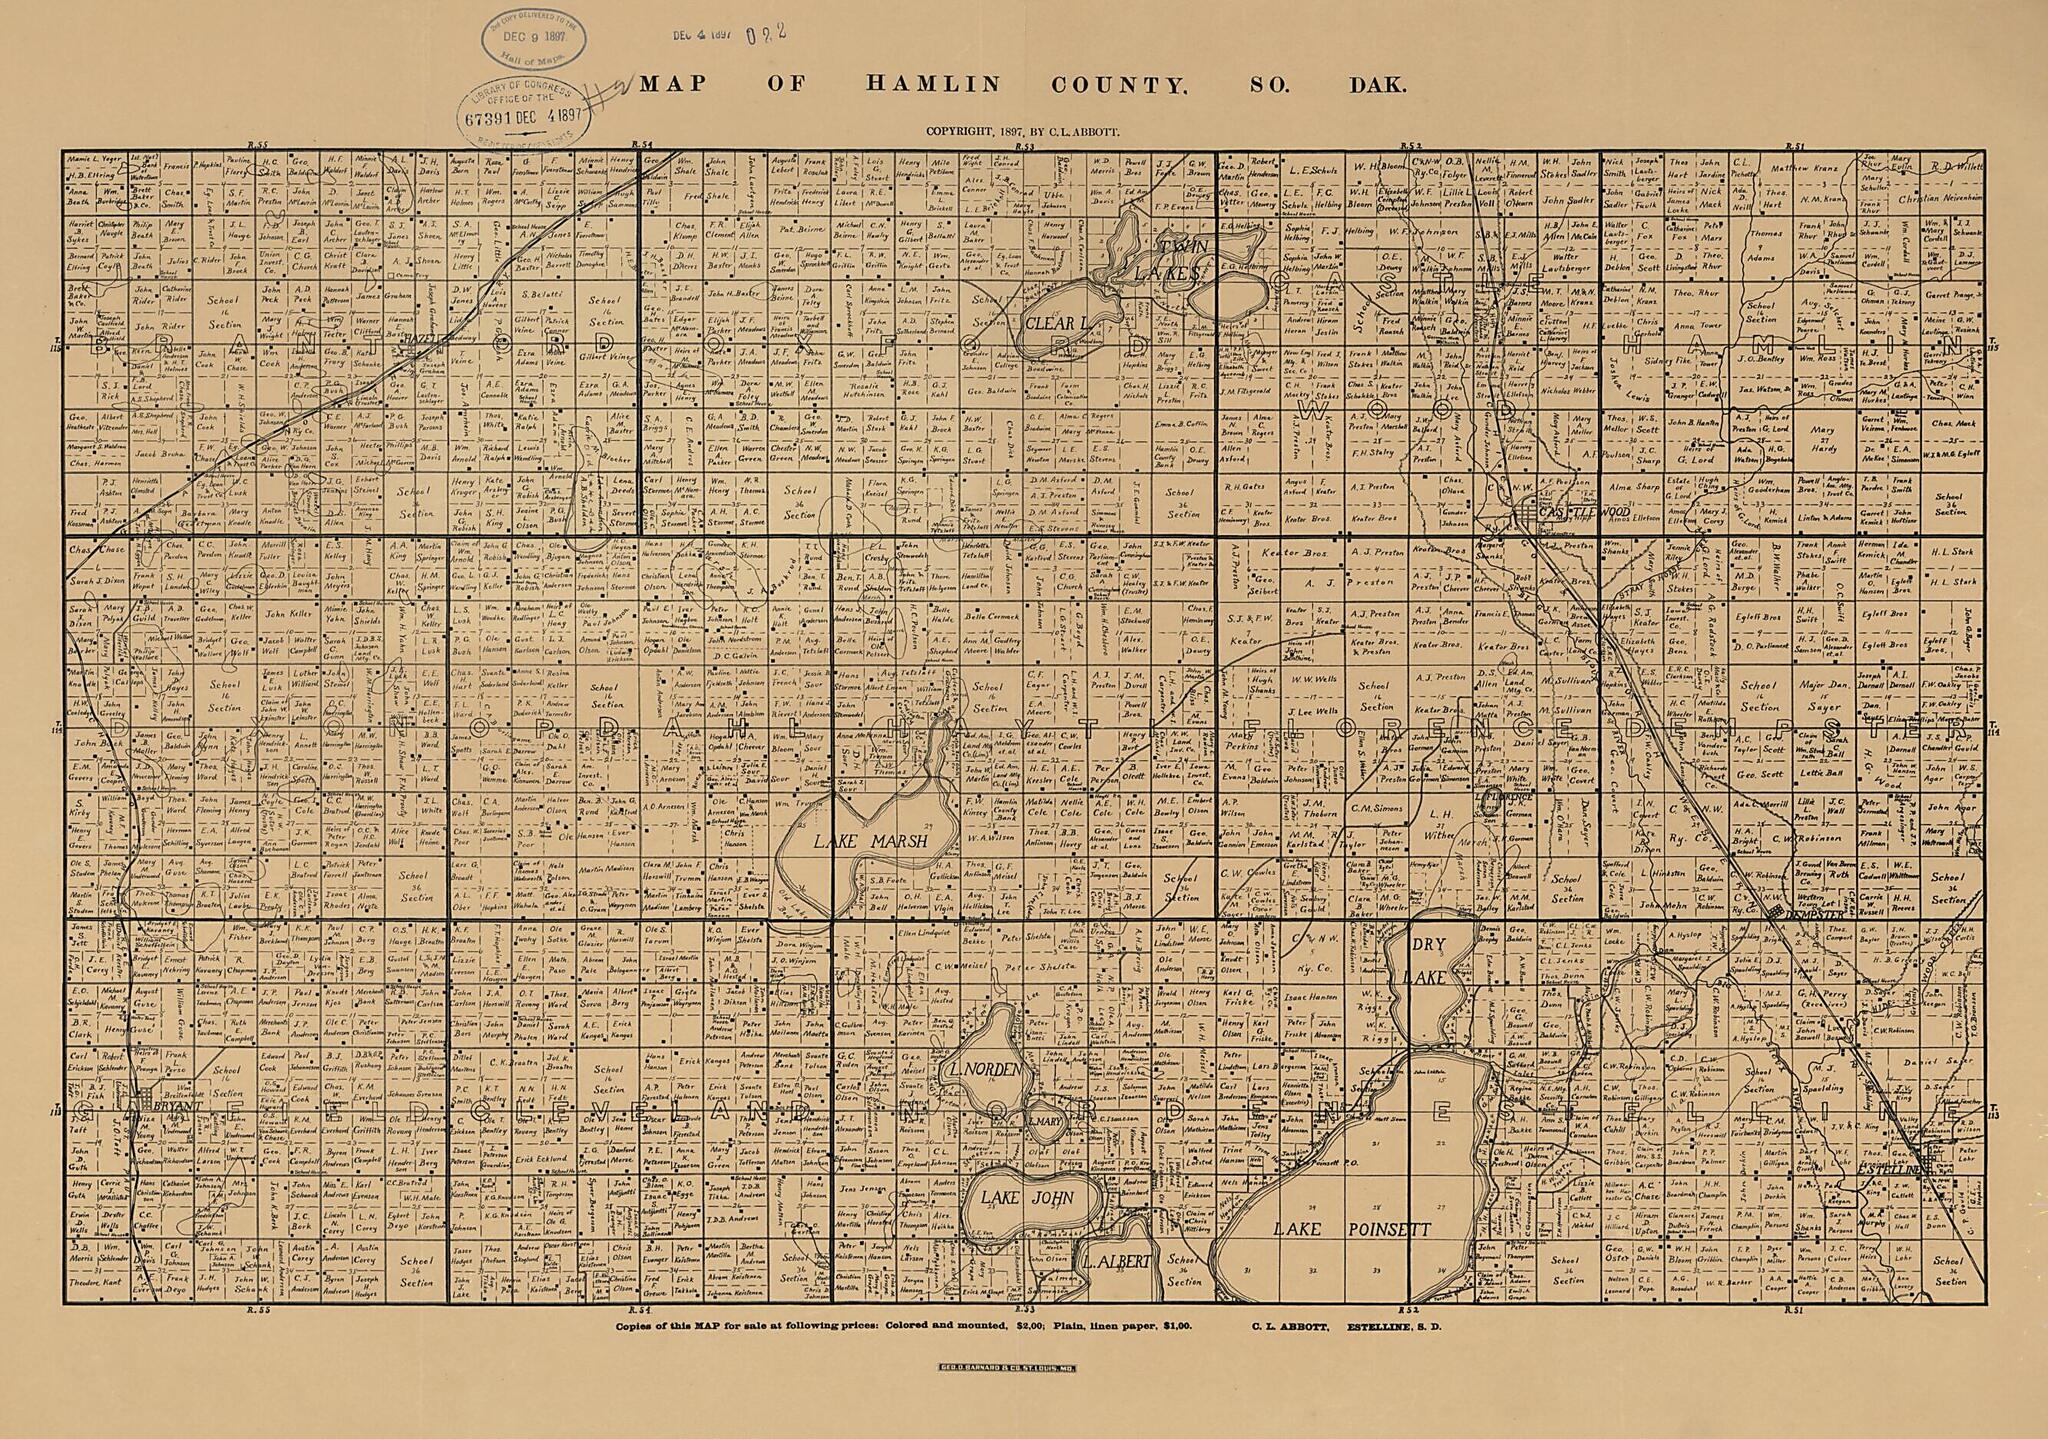 This old map of Map of Hamlin County, So. Dak. (Map of Hamlin County, South Dakota) from 1897 was created by C. L. Abbott in 1897